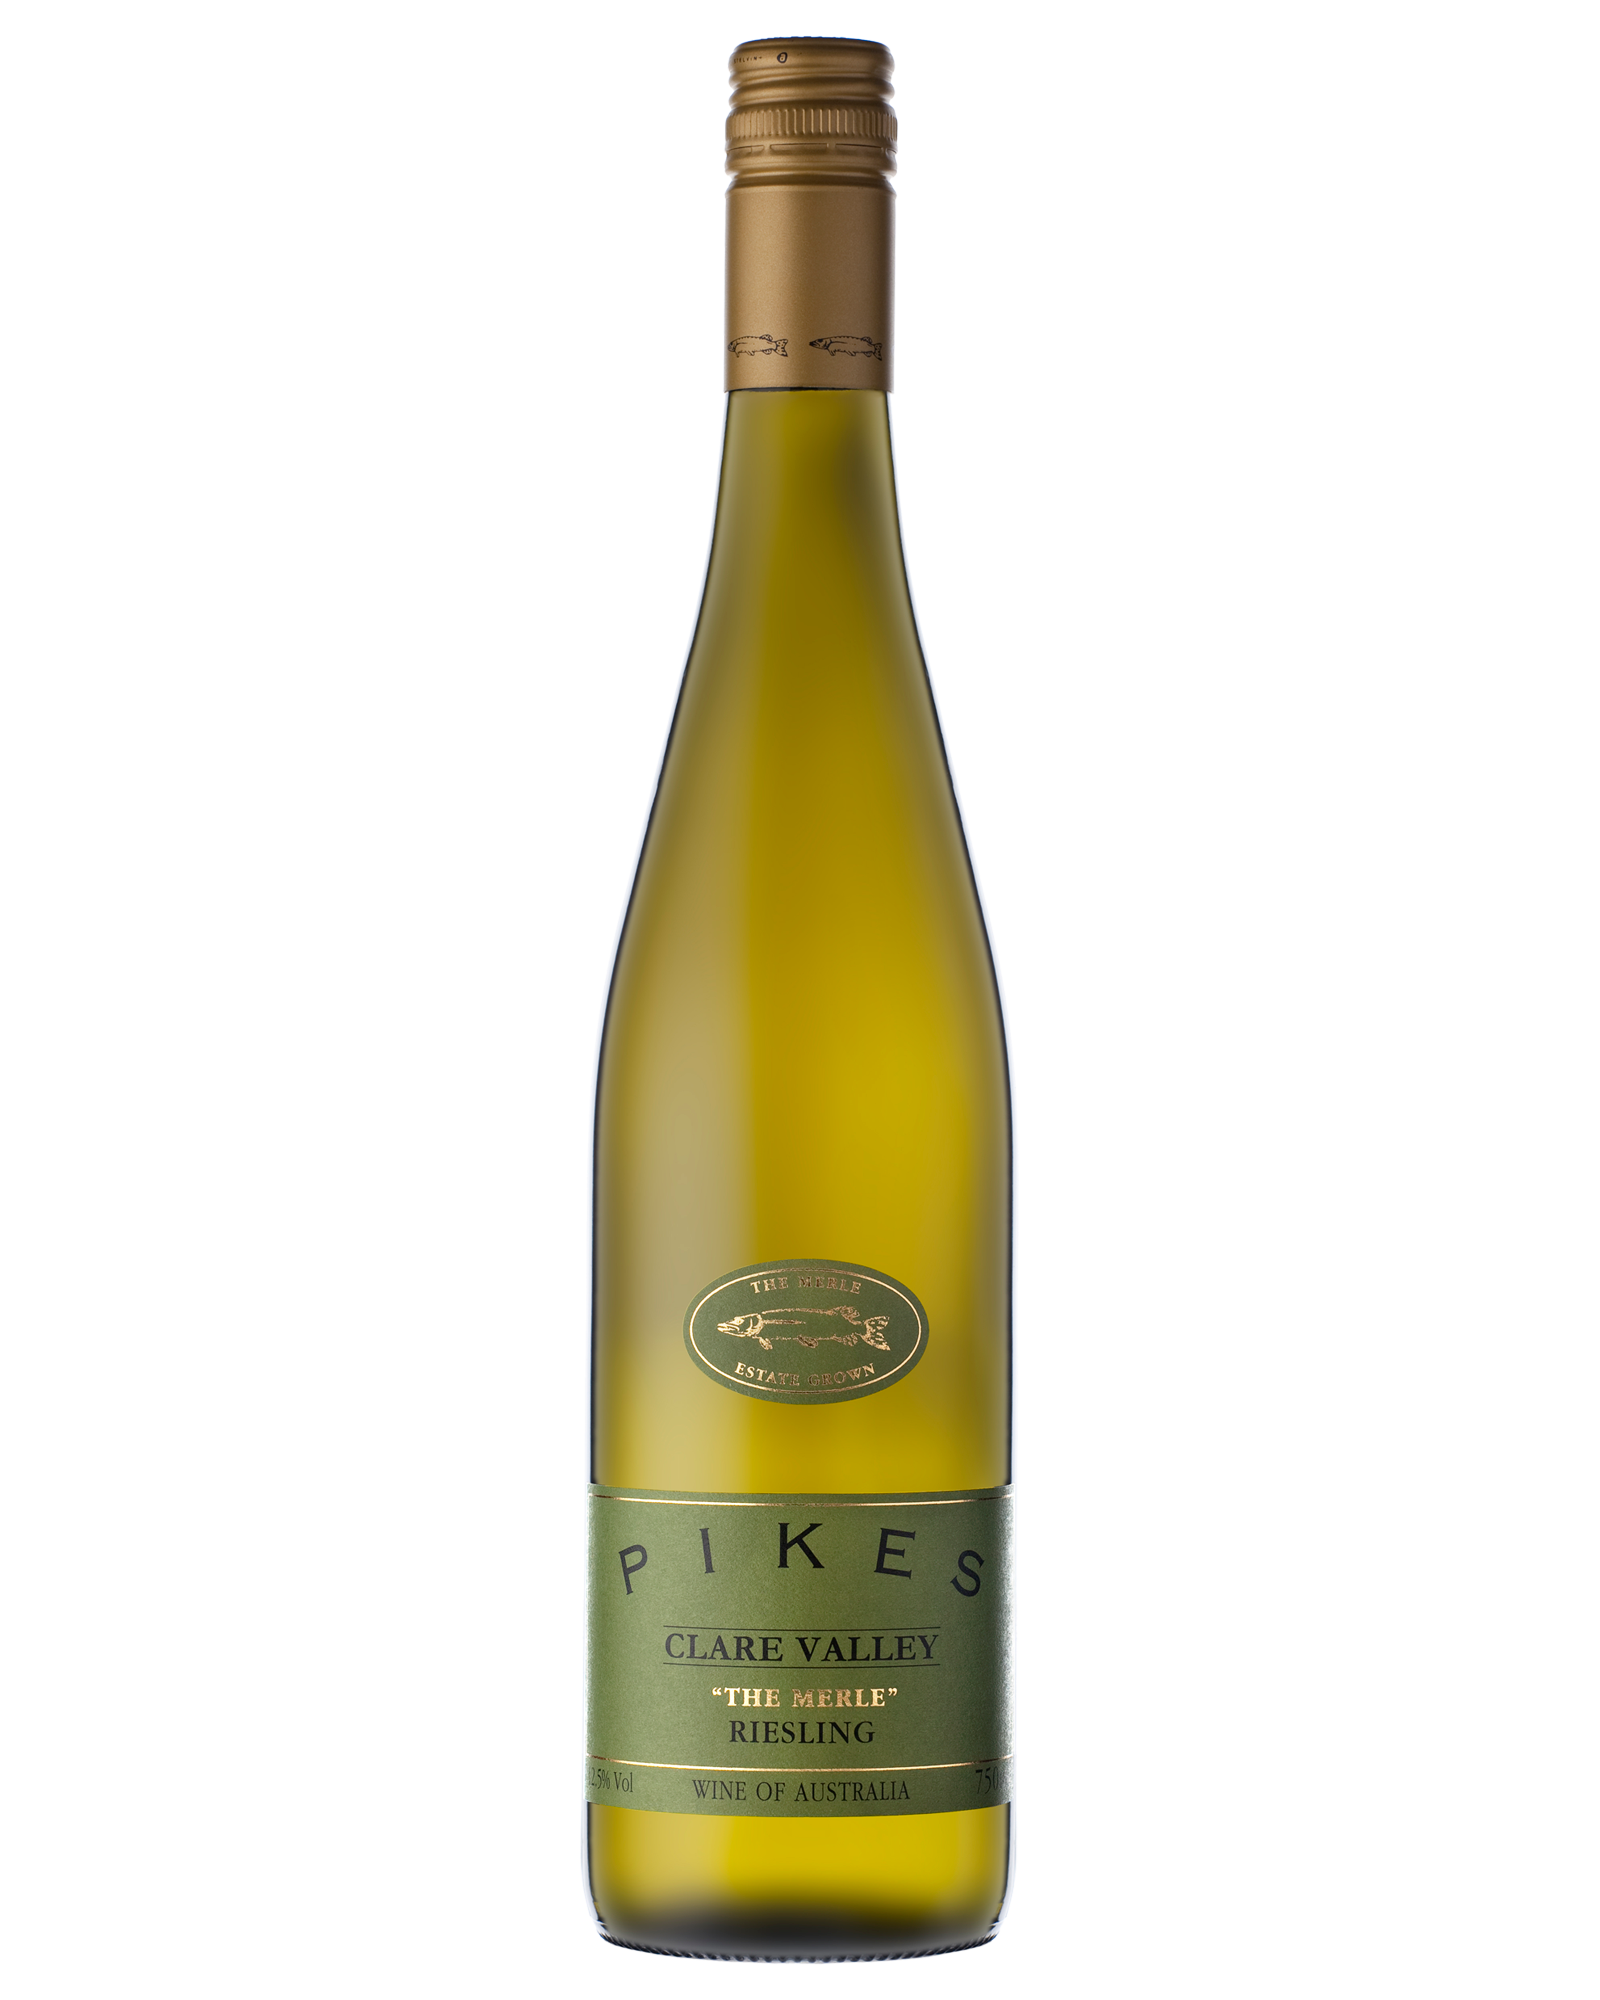 Pikes The Merle Riesling 2013